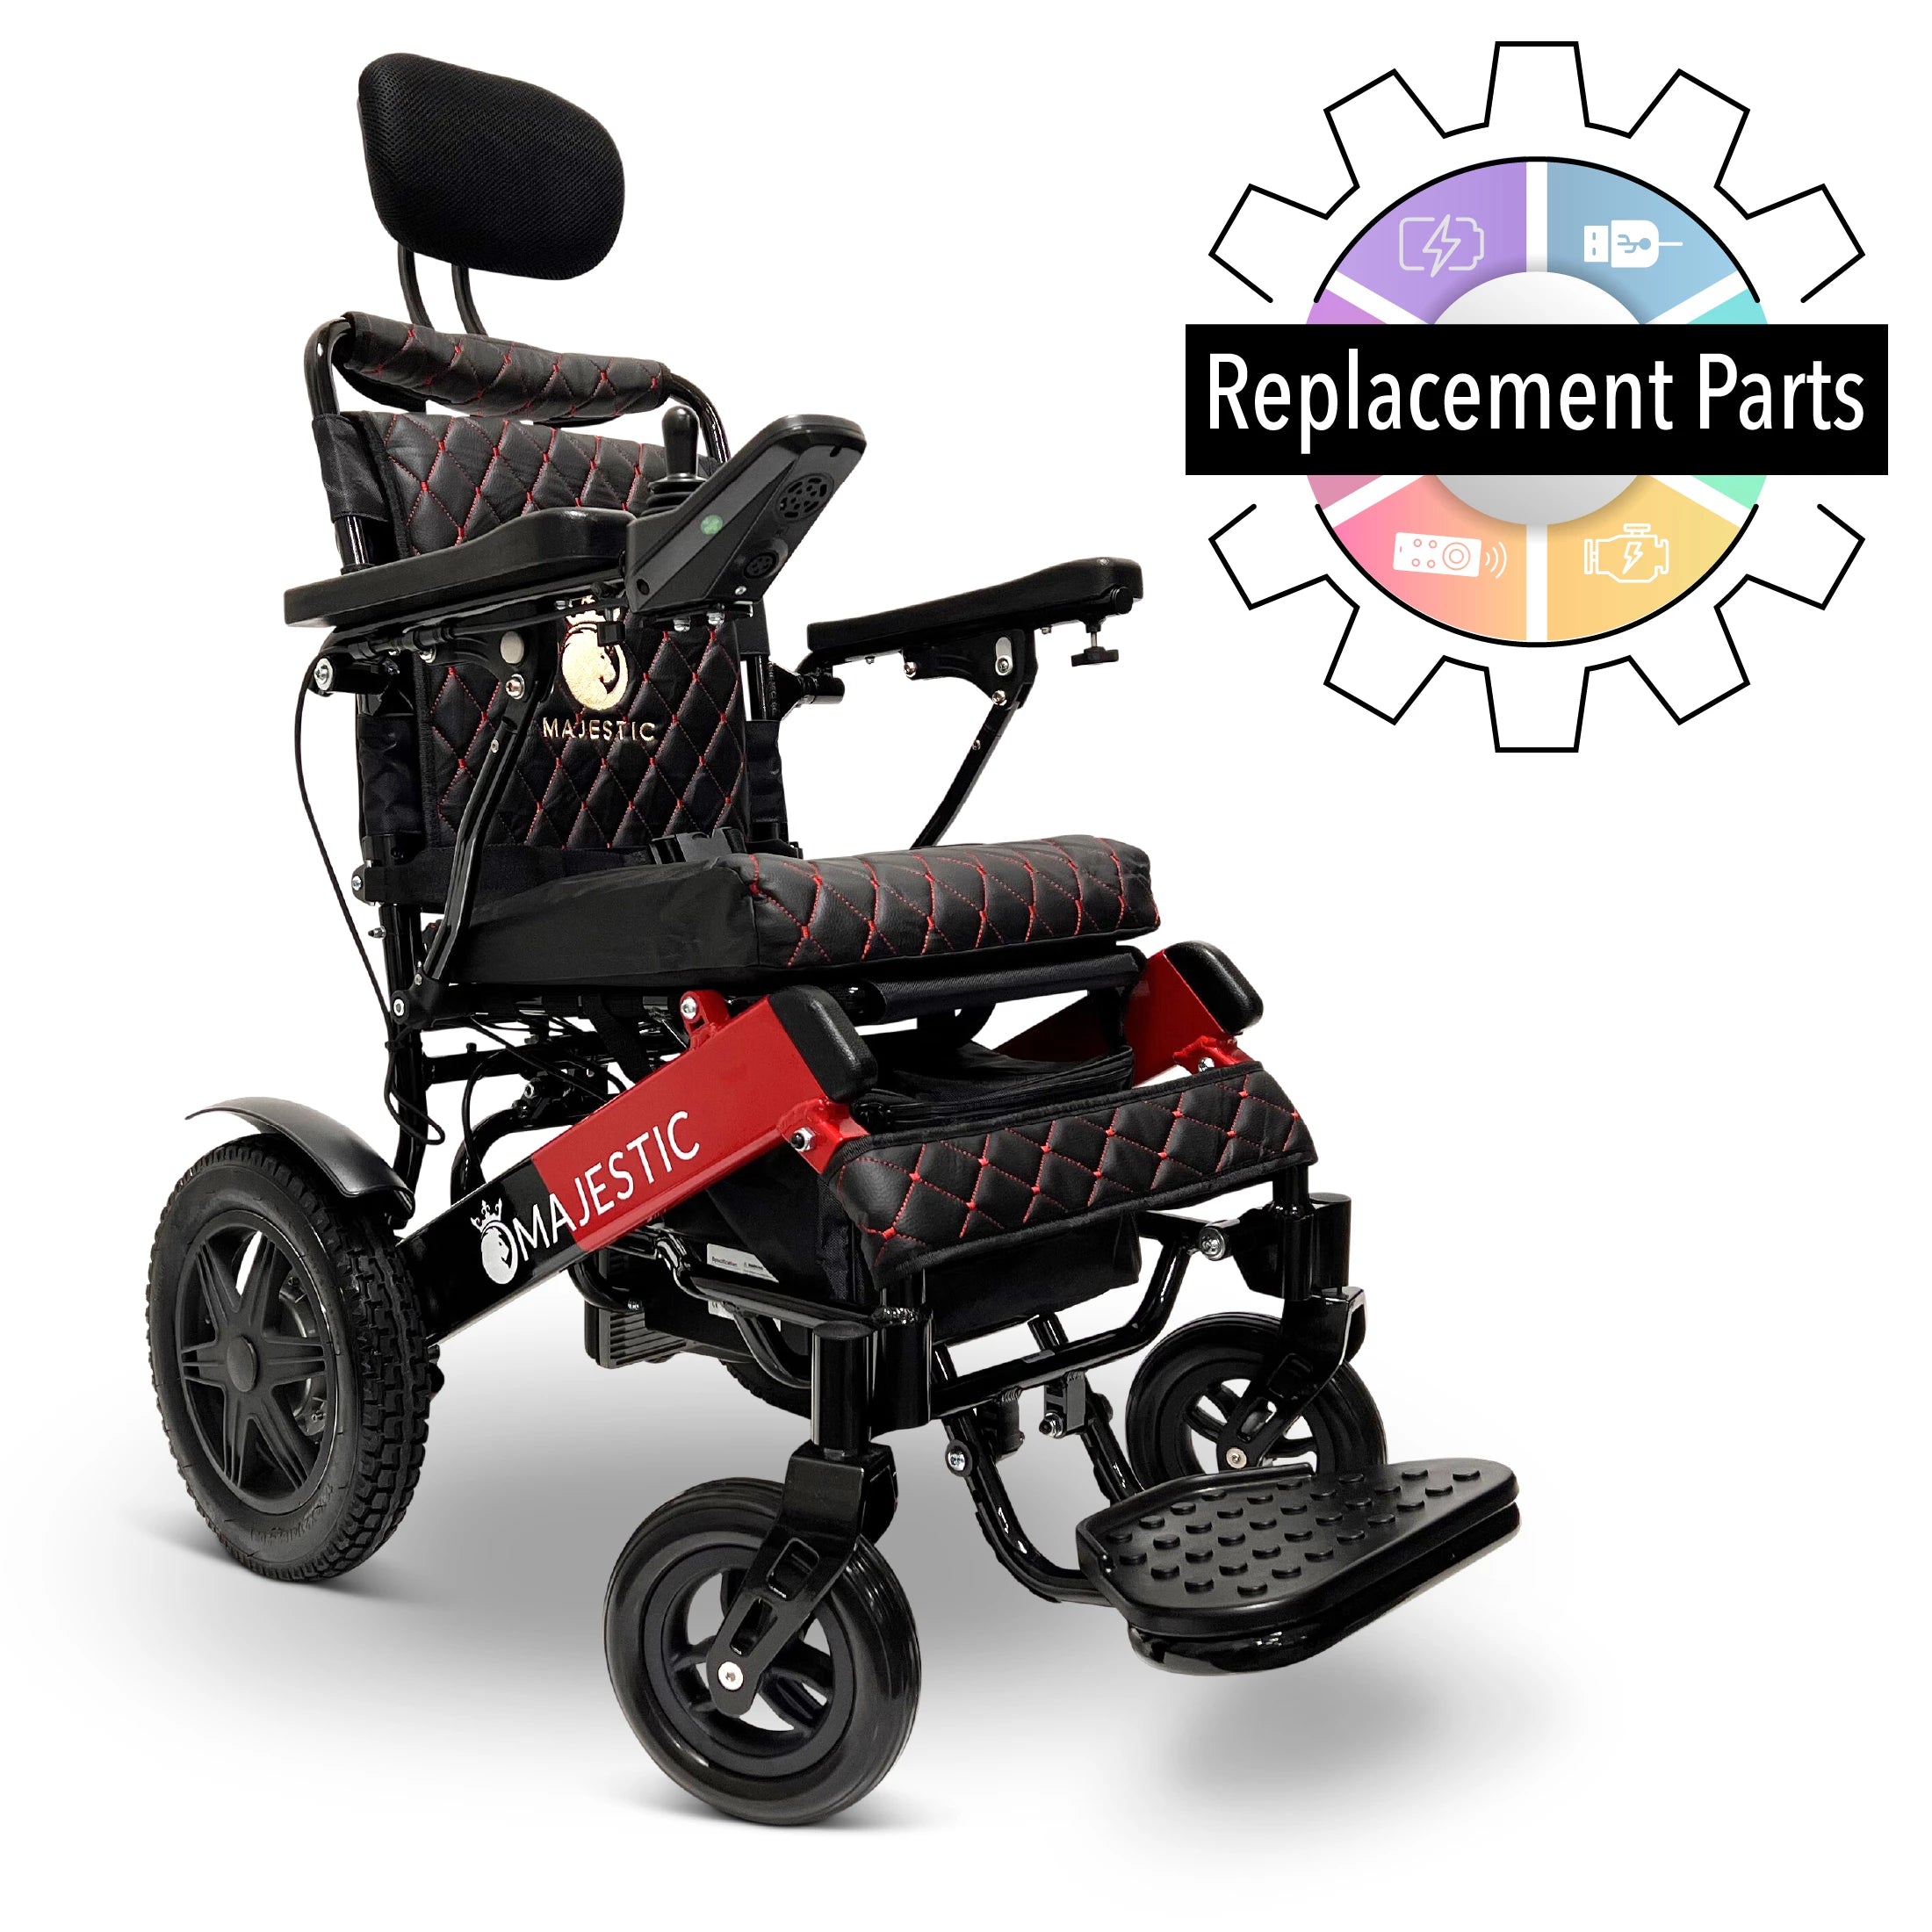 IQ-9000 Electric Wheelchair Replacement Parts